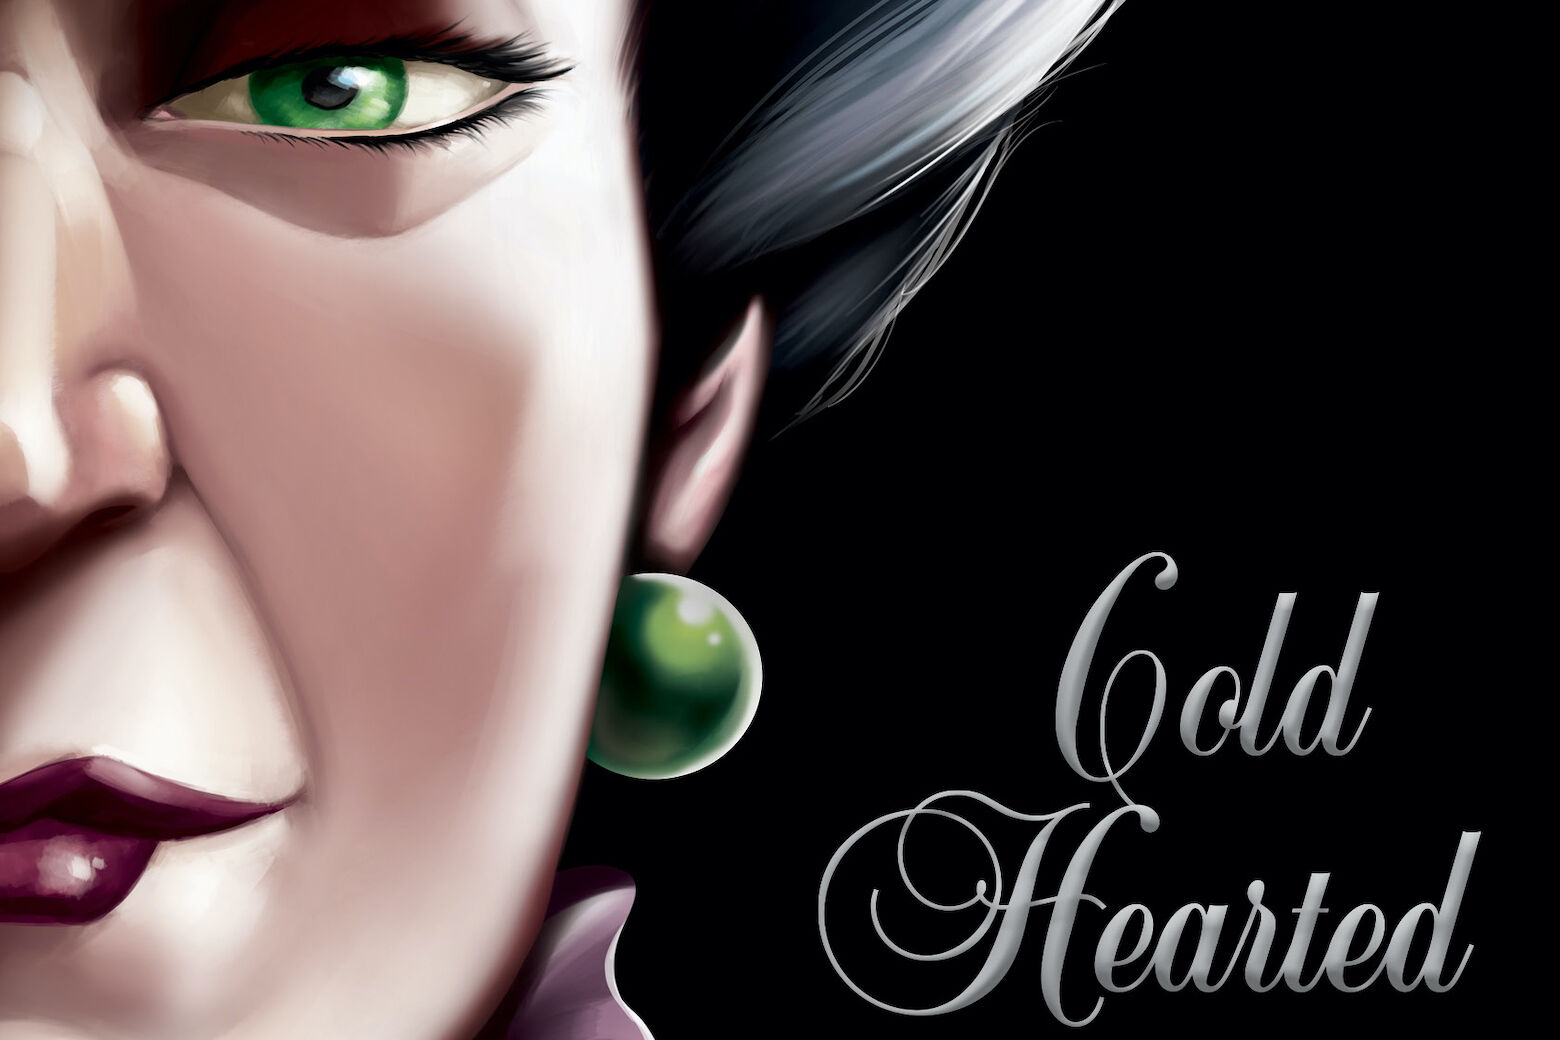 Lady Tremaine - Wicked Stepmother - The First Chapter - Disney